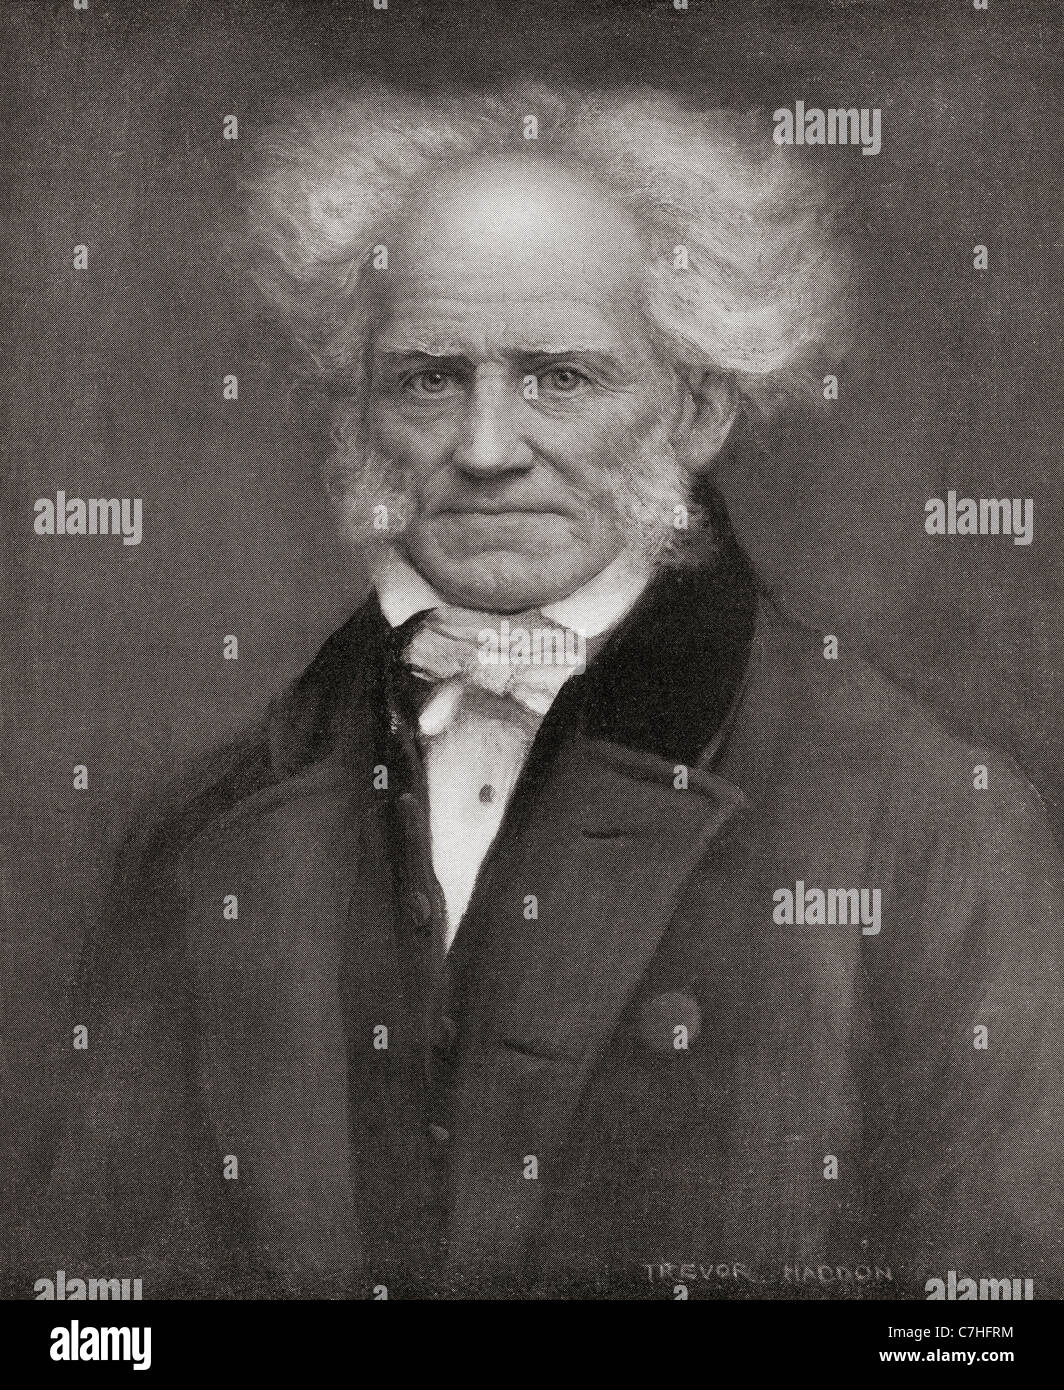 Arthur Schopenhauer, 1788 – 1860. German philosopher. From Bibby's Annual published 1910. Stock Photo